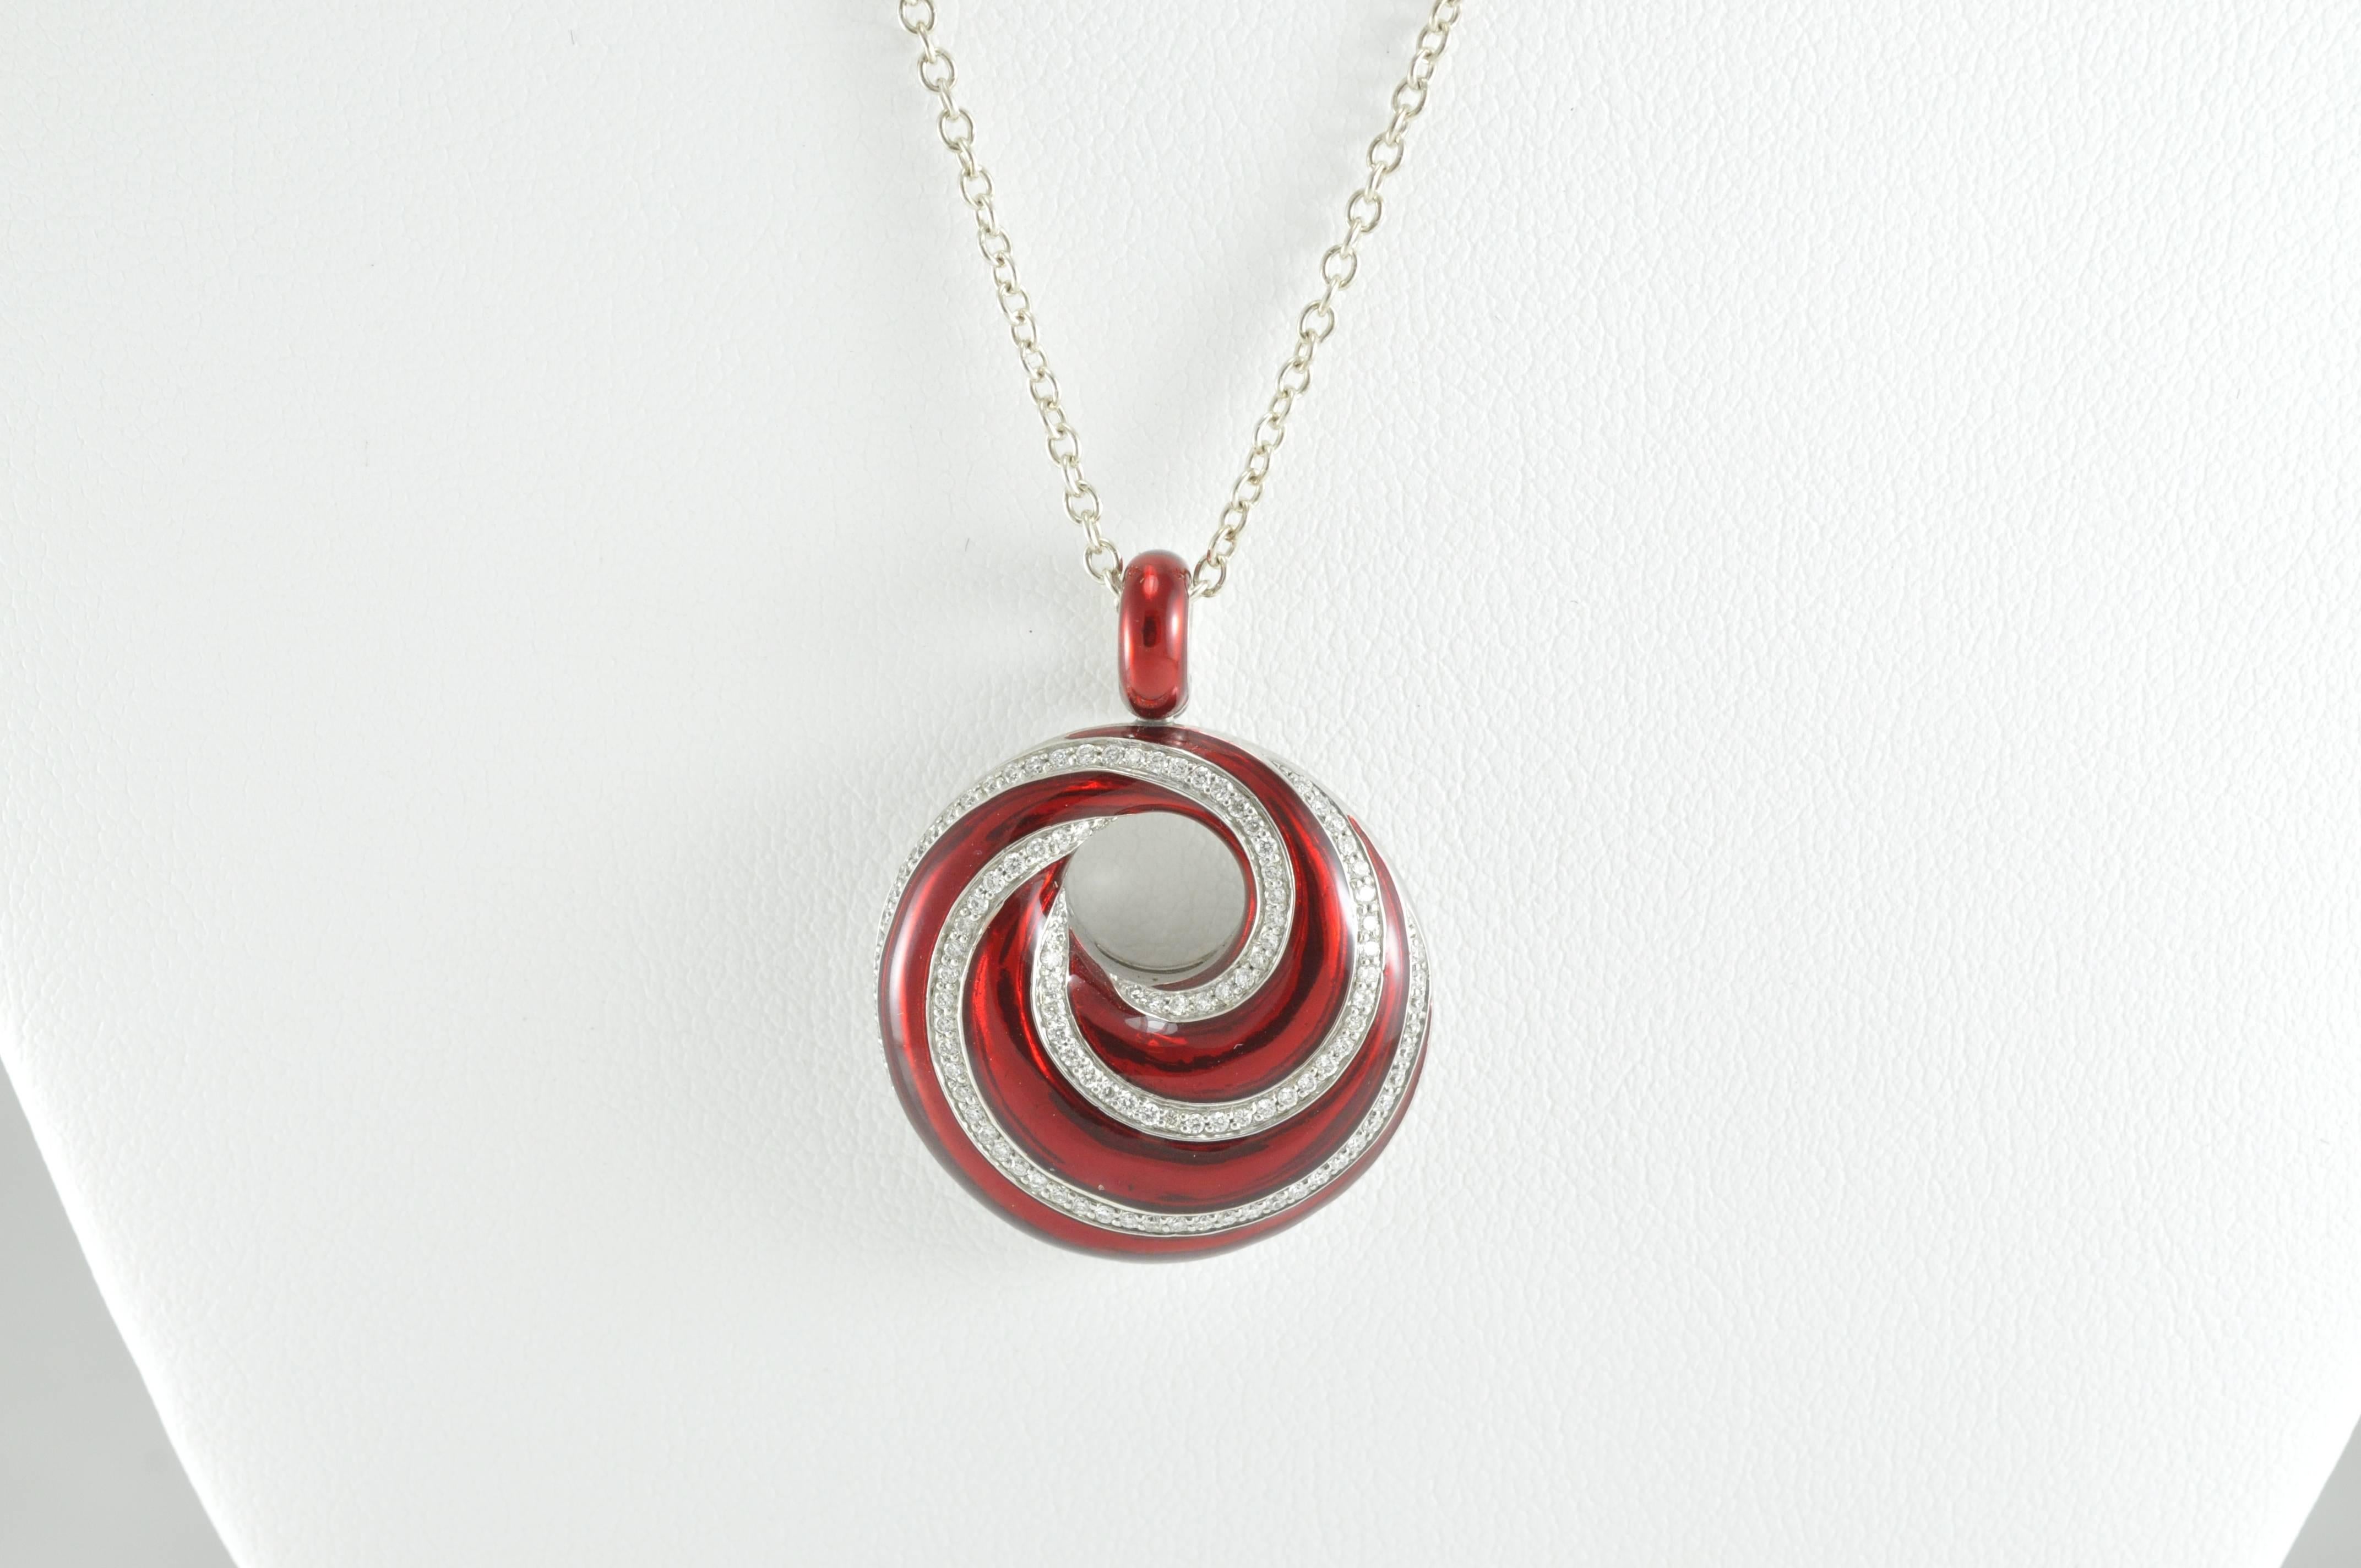 Modern Itallian Design Sterling Silver Red Enamel and Diamond Necklace